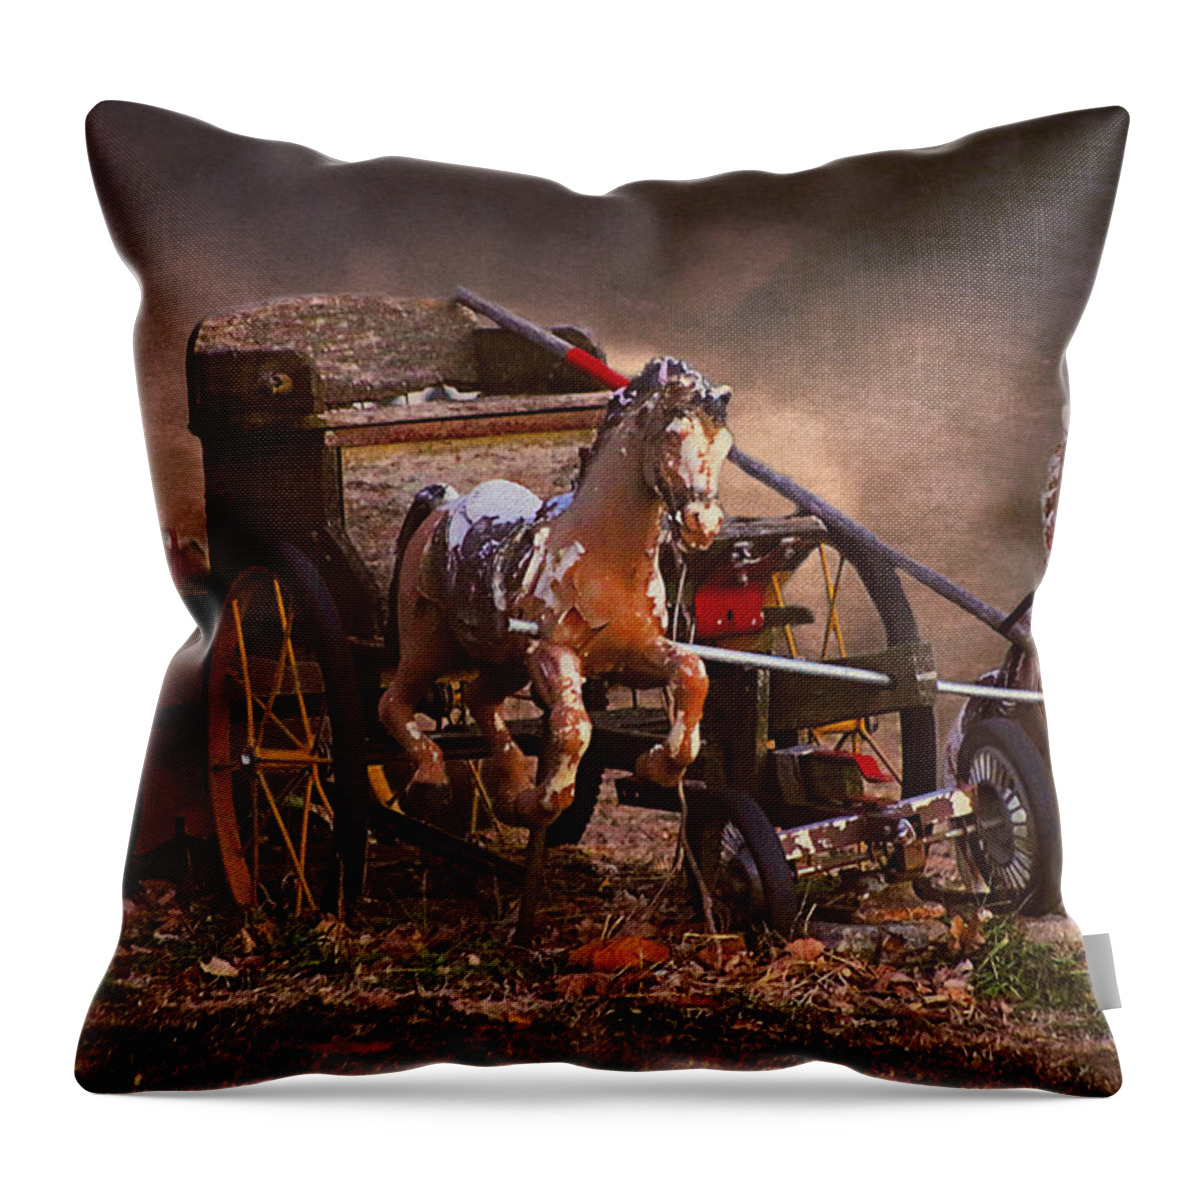 Old Toys Throw Pillow featuring the photograph Fantastic Forgotten Toys by Theresa Campbell